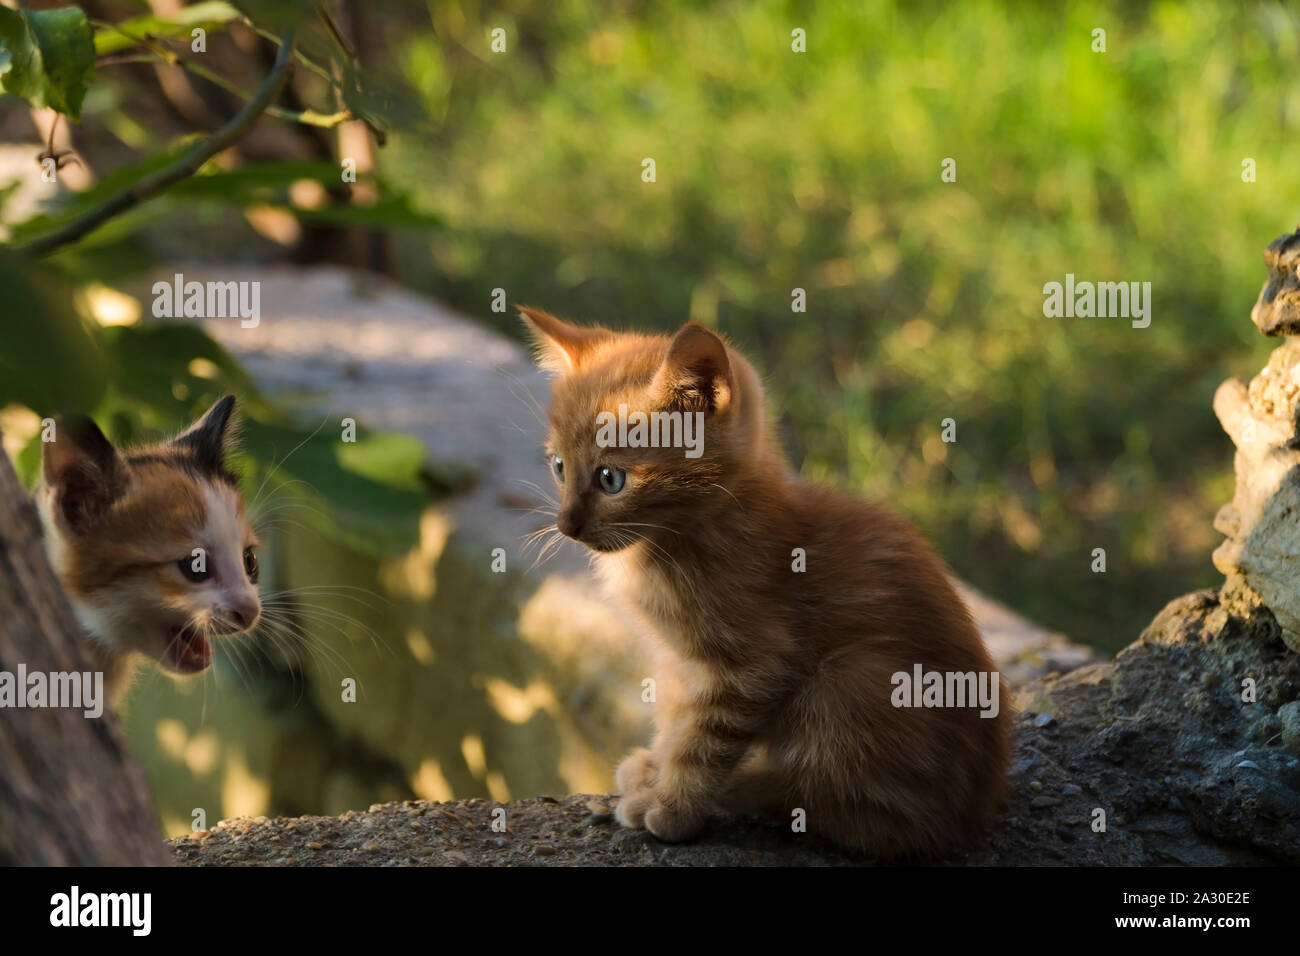 One month year old tiny ginger kitten is looking at its sibling at garden and illuminated with warm sunset light. Stock Photo